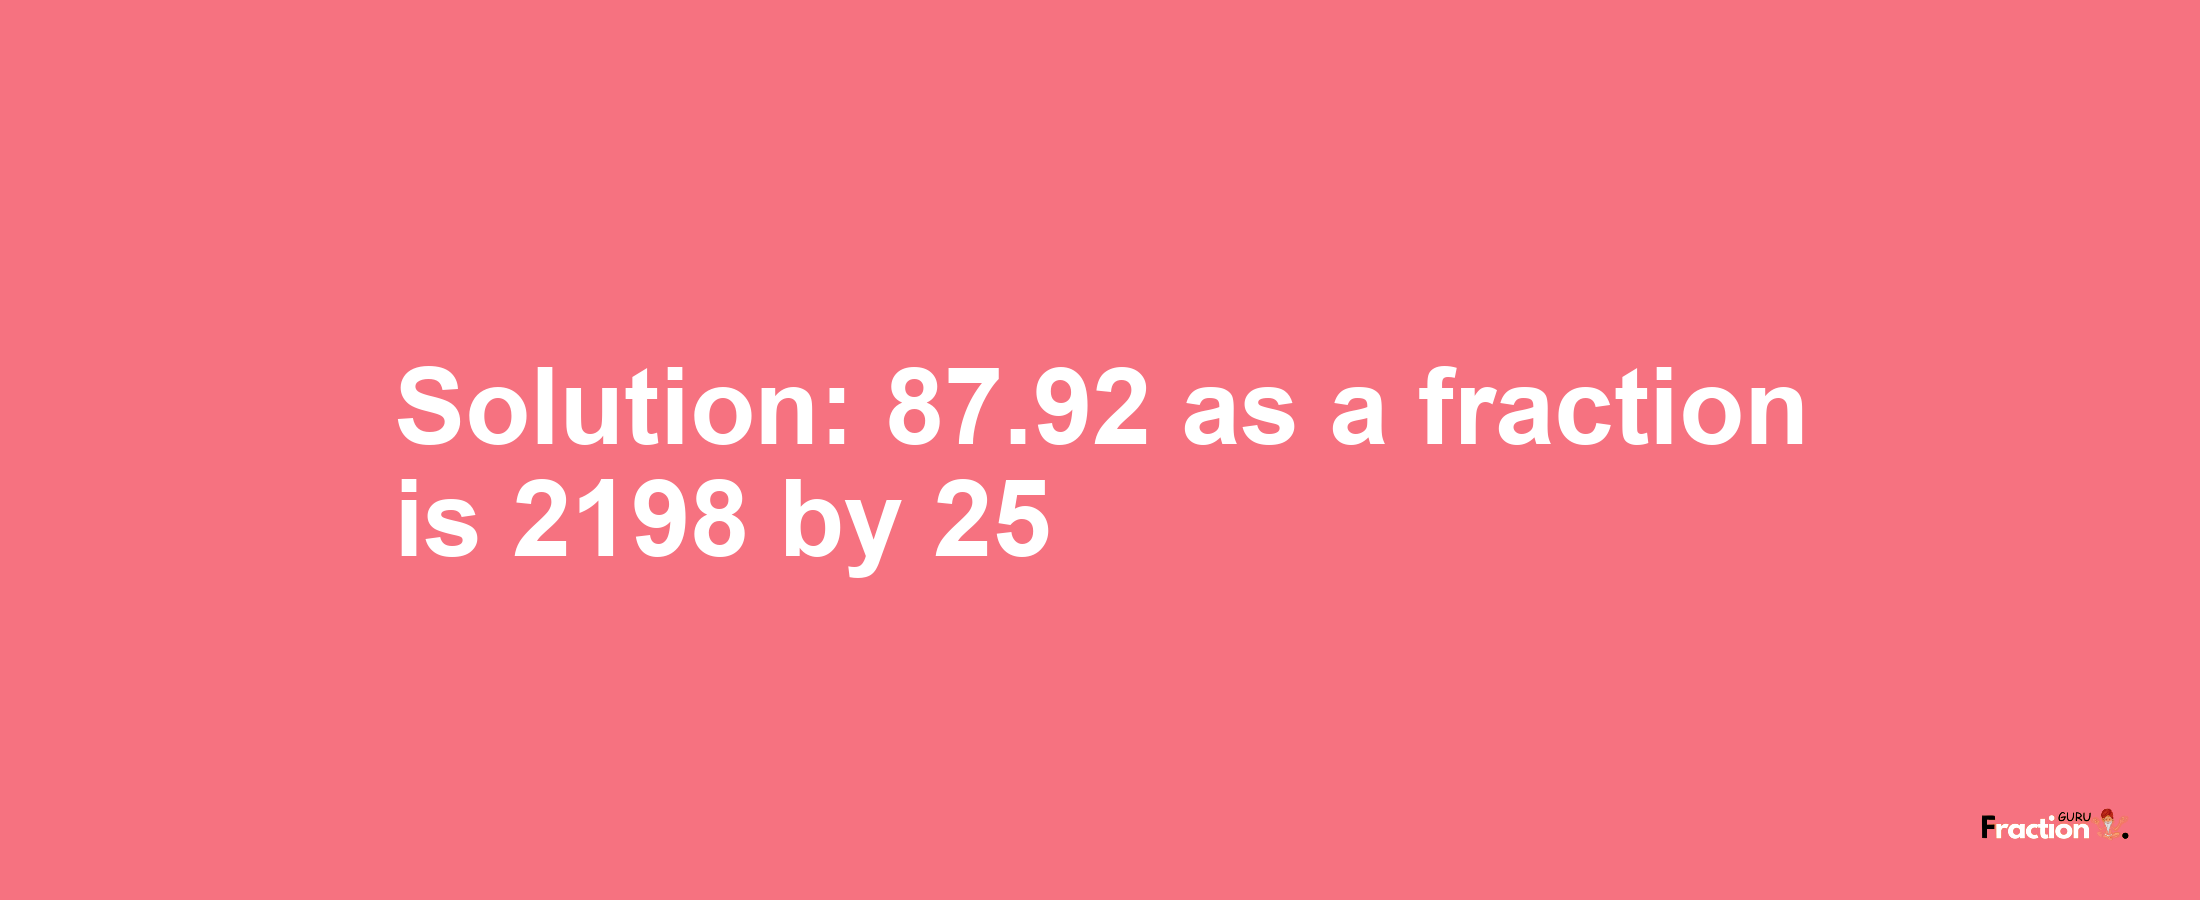 Solution:87.92 as a fraction is 2198/25